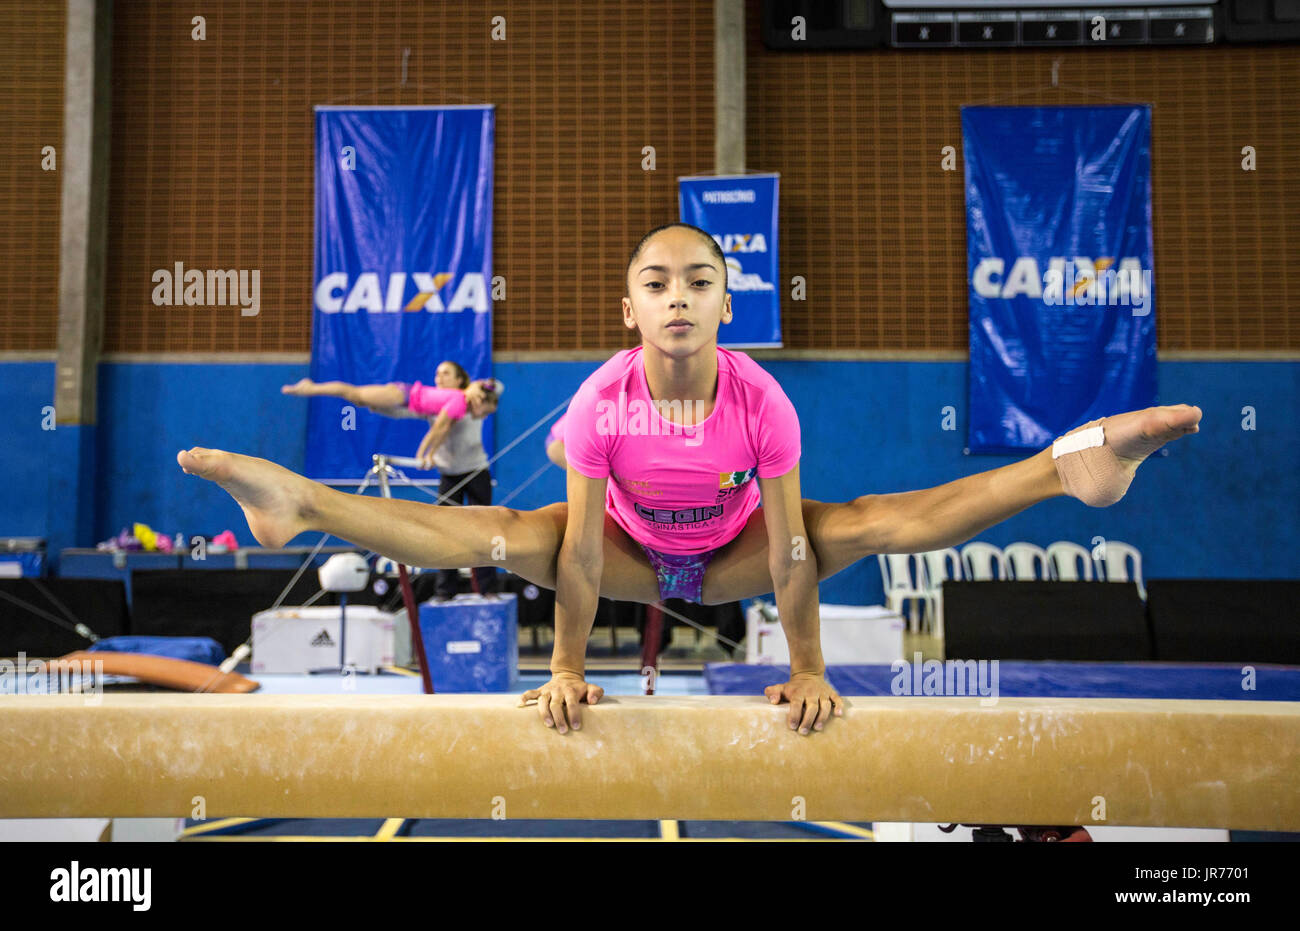 SÃO PAULO, SP - 03.08.2017: TREINOS BRASILEIRO DE GINÁSTICA SÃO PAULO - Brazilian artistic gymnastics championship will take place from August 04 to 06 at Esporte Clube Pinheiros. In the photo gymnast Julia Soares, of the team CEGIN of Curitiba does exercises during training session on the afternoon of this Thursday (03). (Photo: Bruno Rocha/Fotoarena) Stock Photo